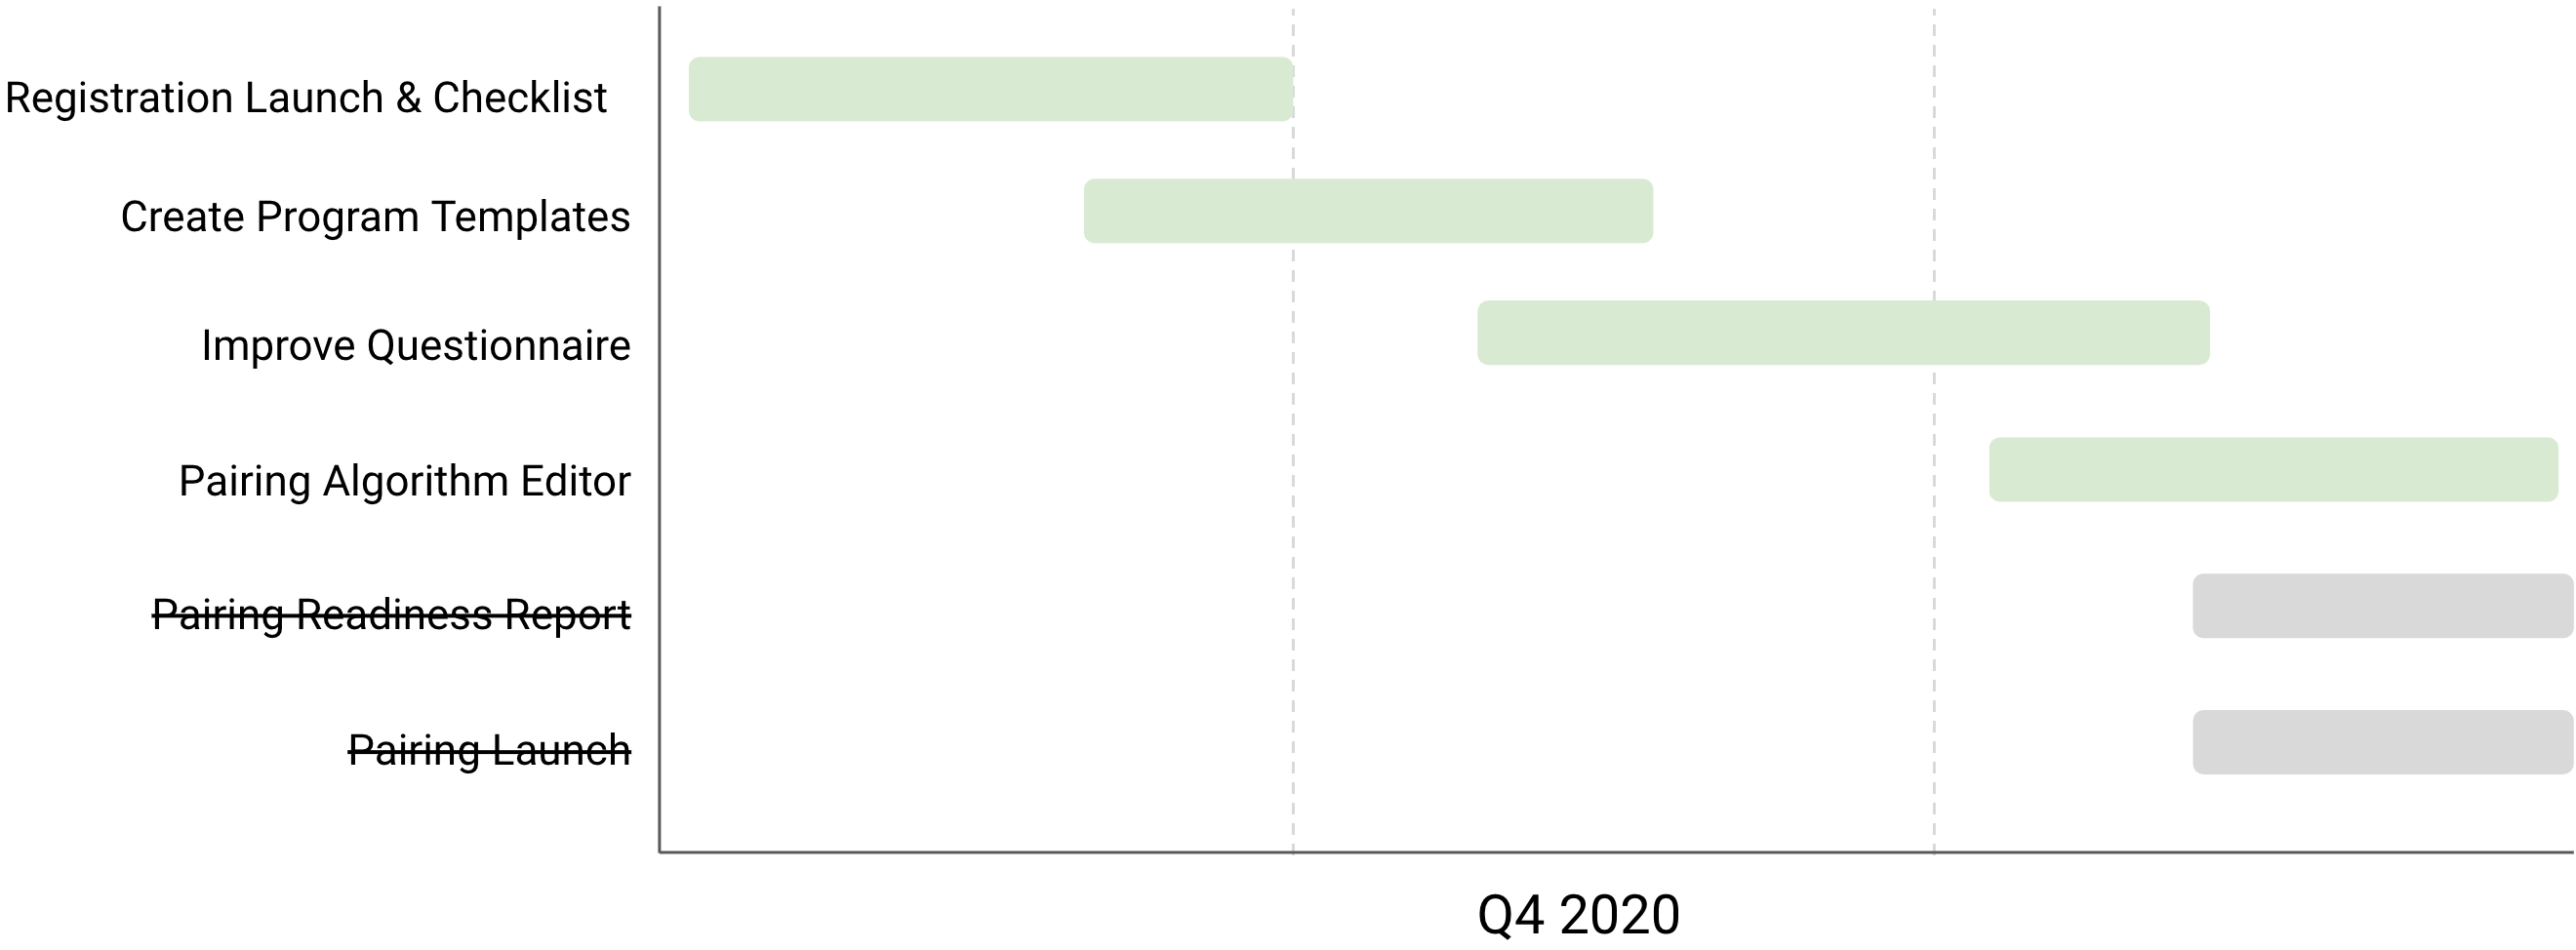 gantt chart showing timelines changed